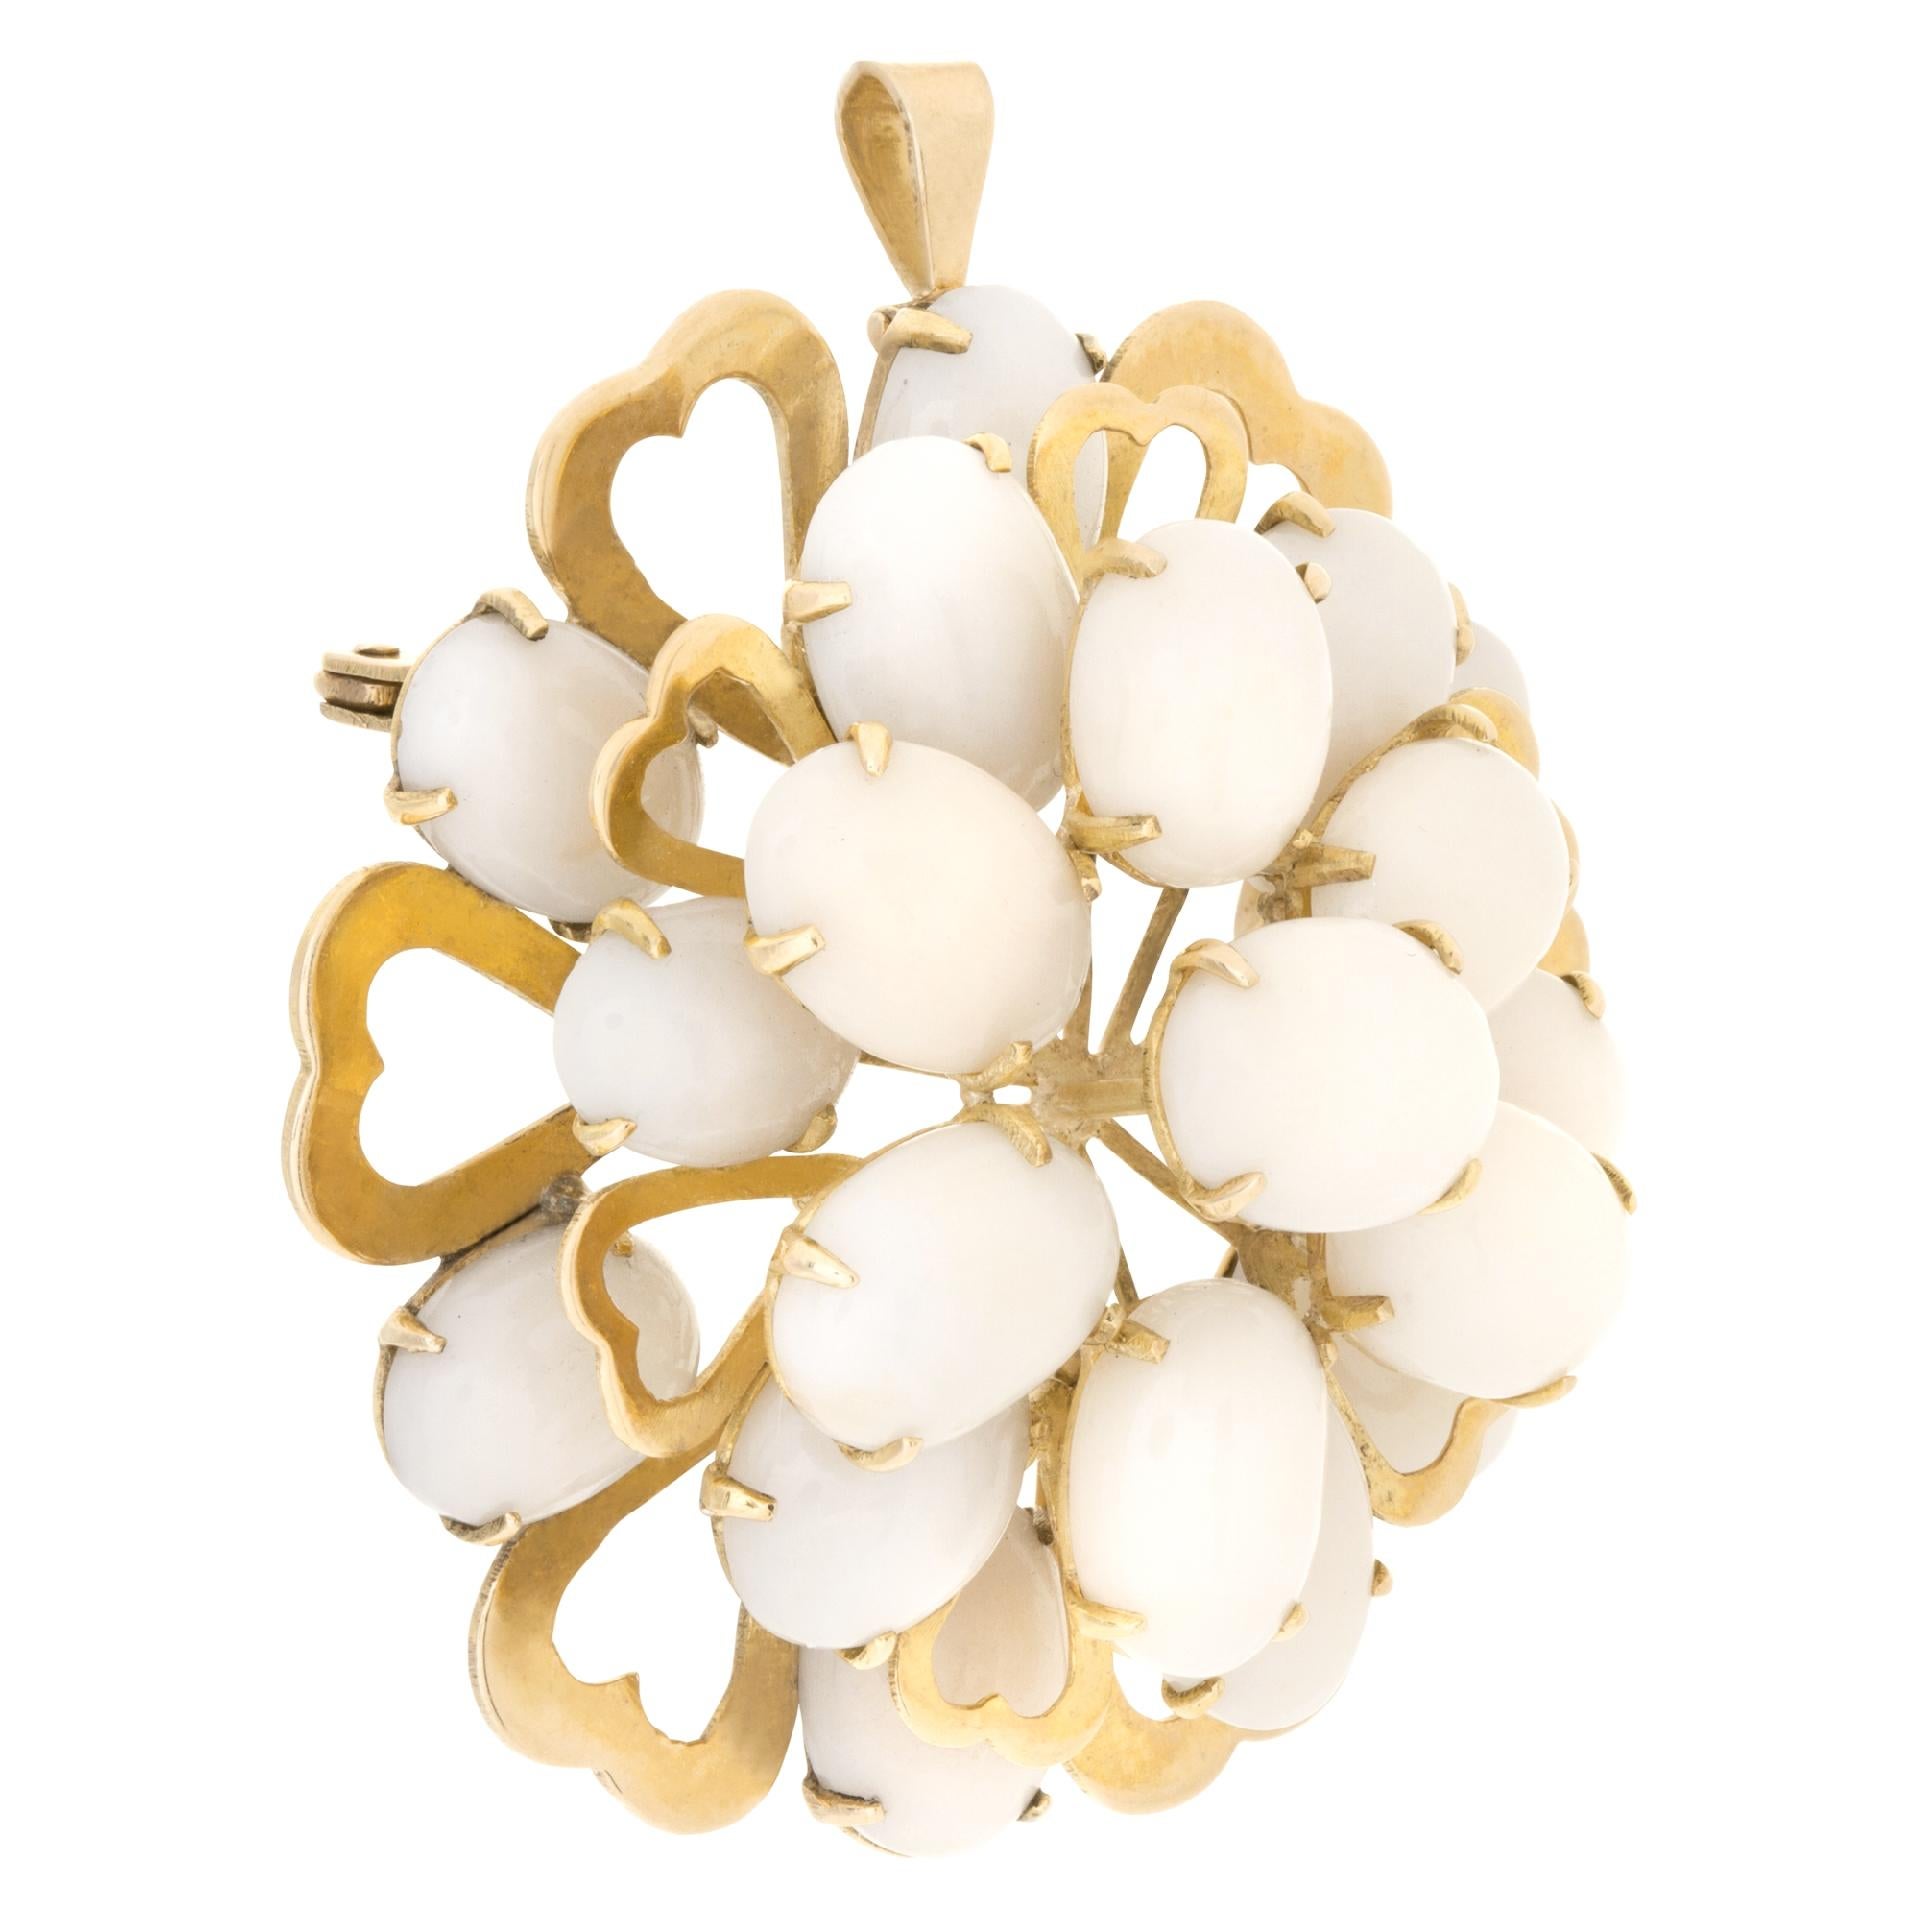 ESTIMATED RETAIL: $3,240.00   YOUR PRICE: $1,980.00
Flower shaped Angel-skin Coral bouquet pendant/brooch set in 14k yellow gold.